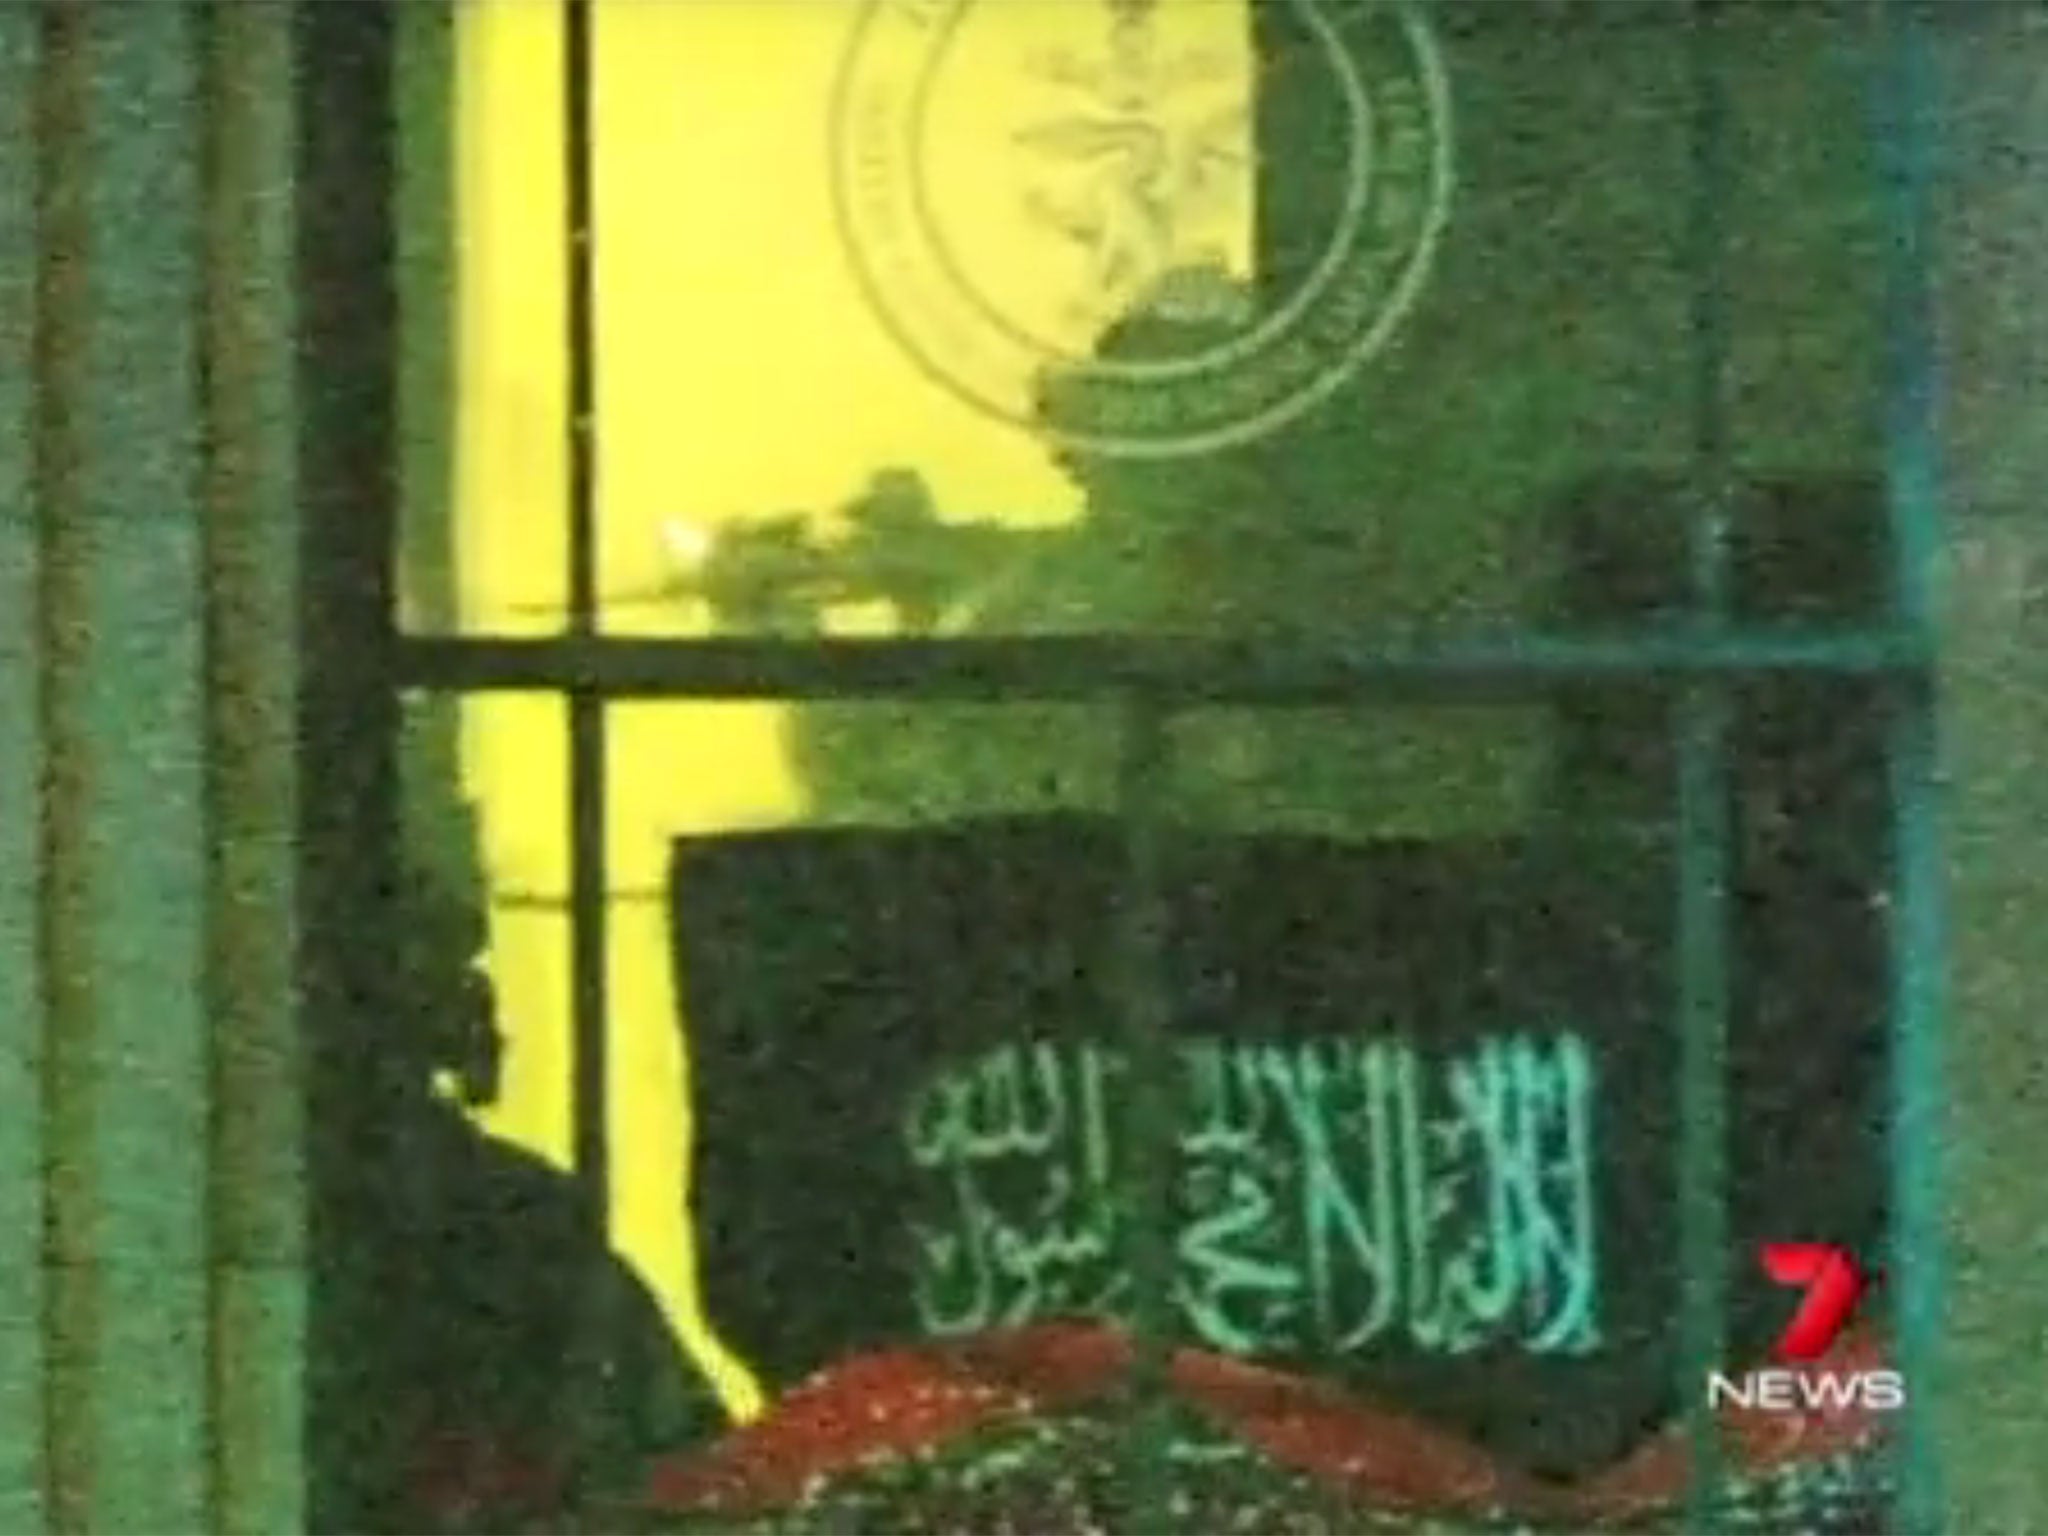 Sydney Siege: Dramatic new footage shows sniper on roof opposite cafe.